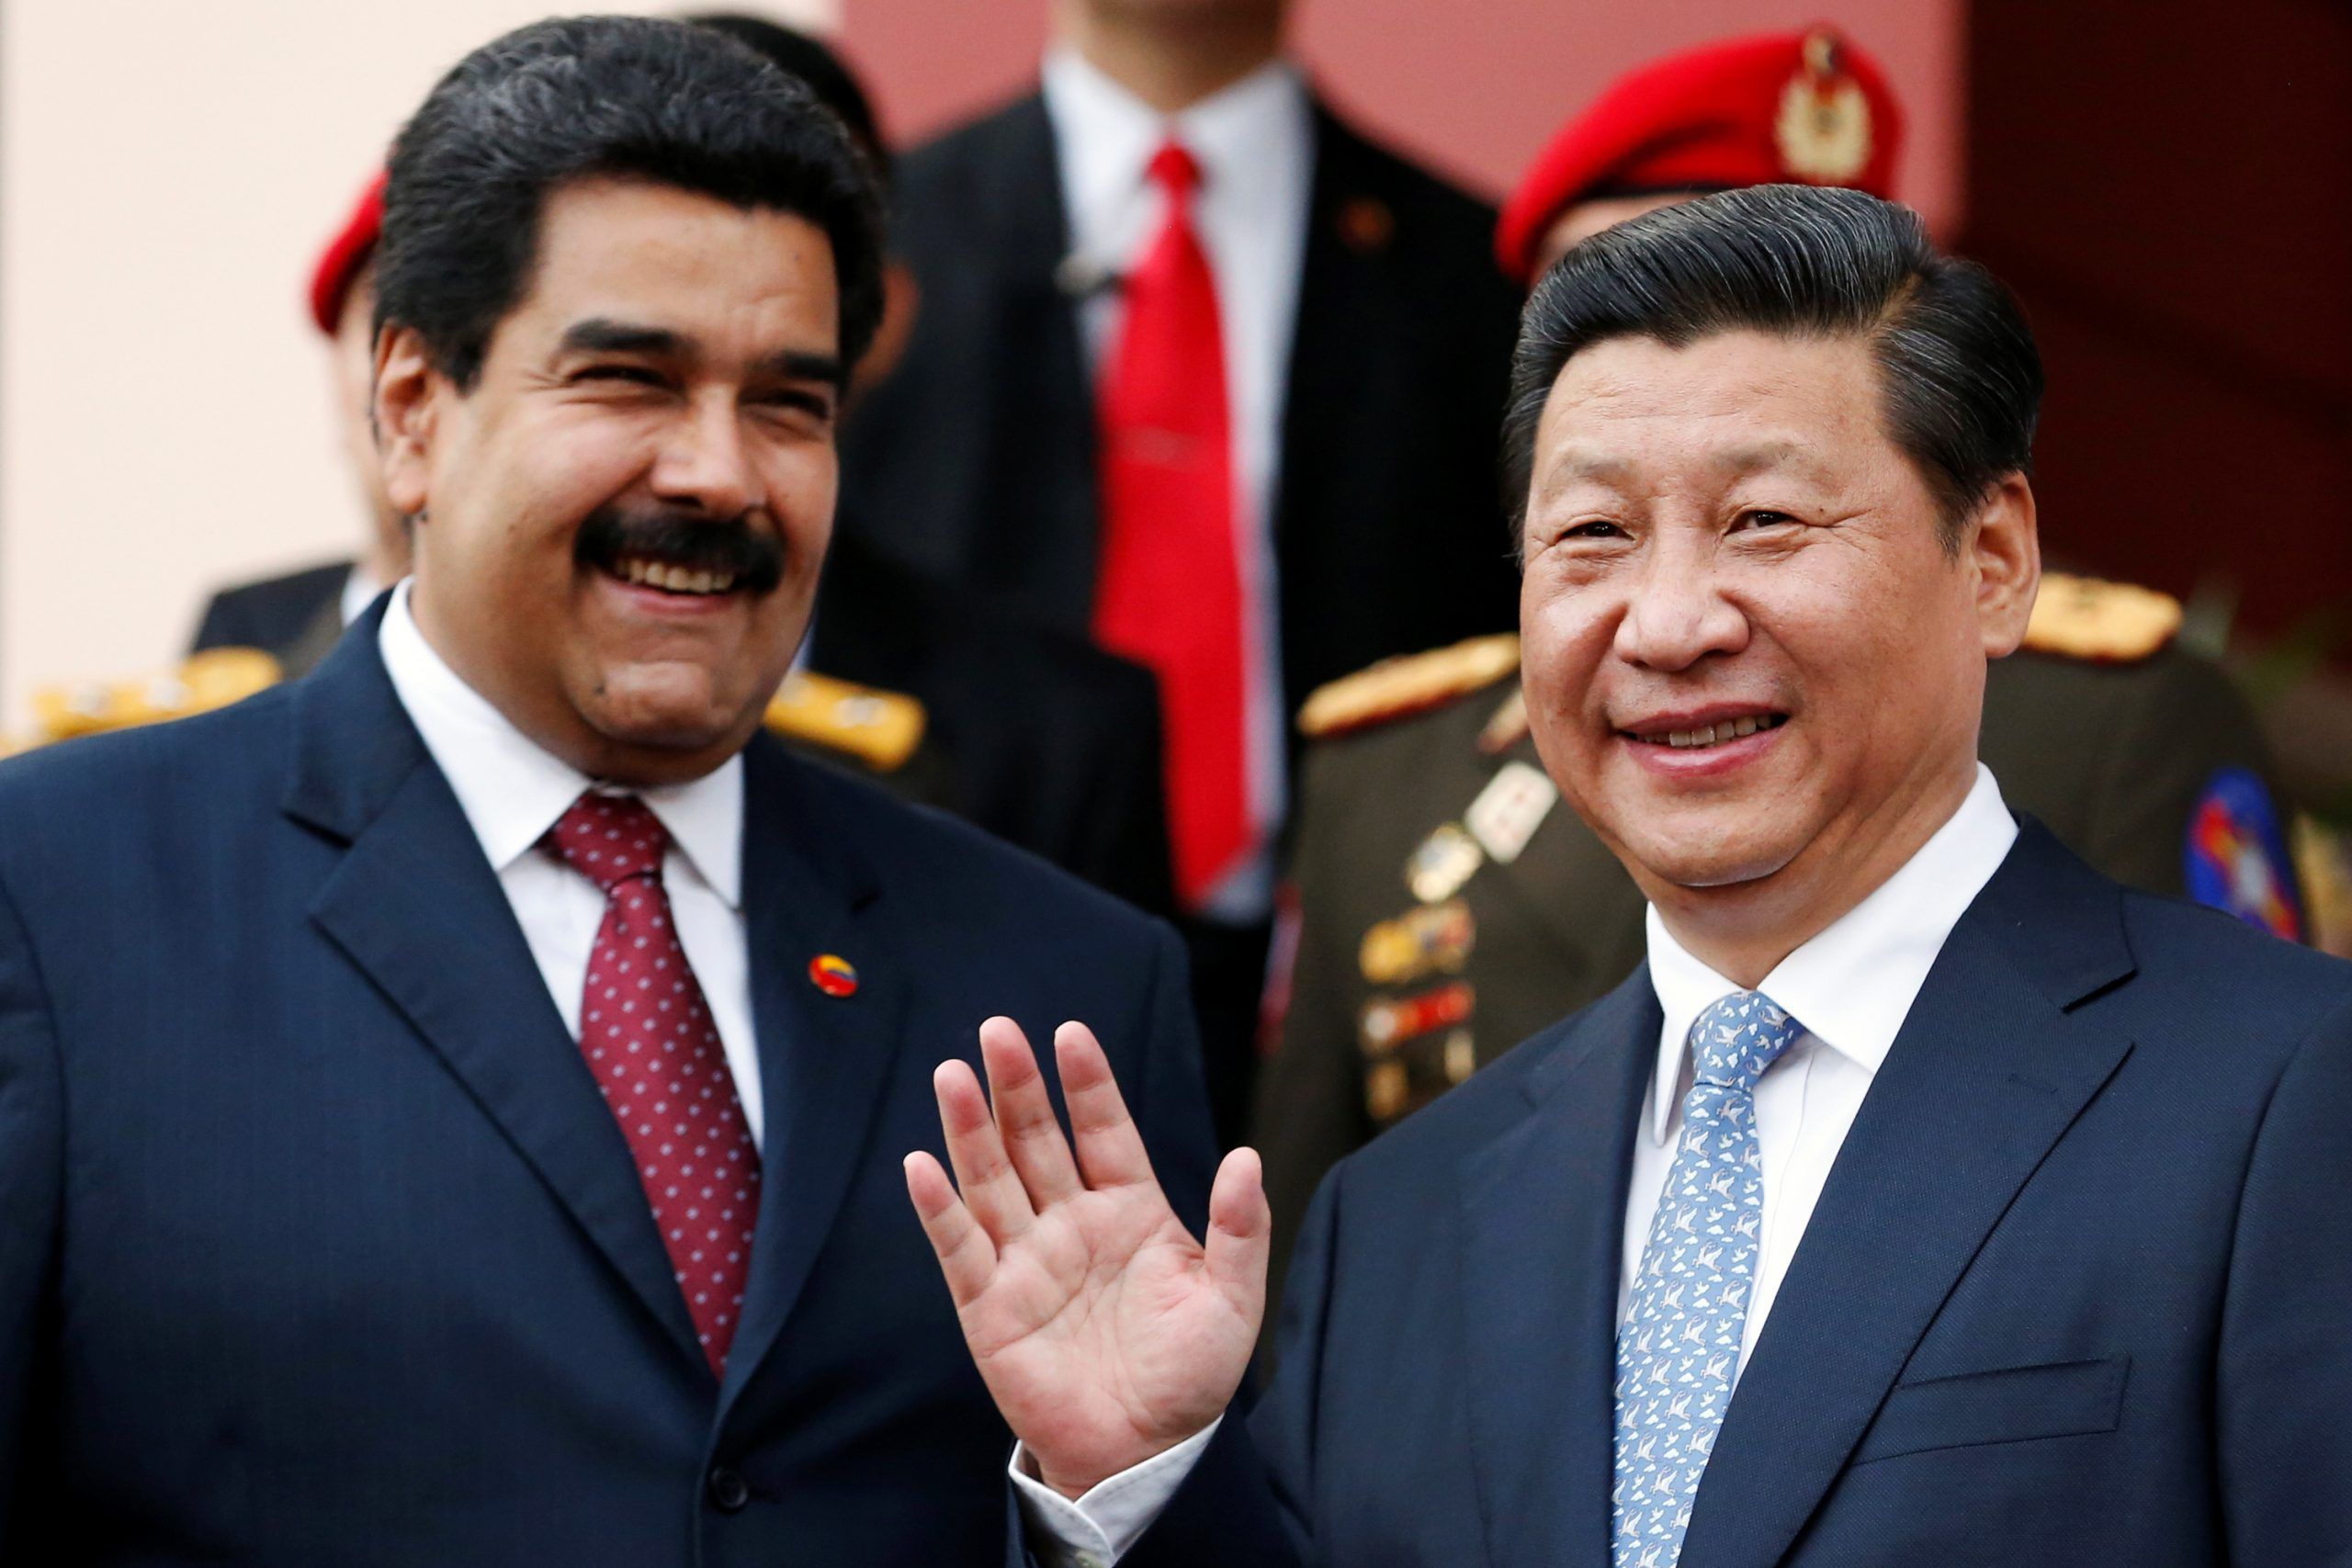 FILE PHOTO: China's President Xi Jinping (R) attends a meeting with Venezuela's President Nicolas Maduro at Miraflores Palace in Caracas.   